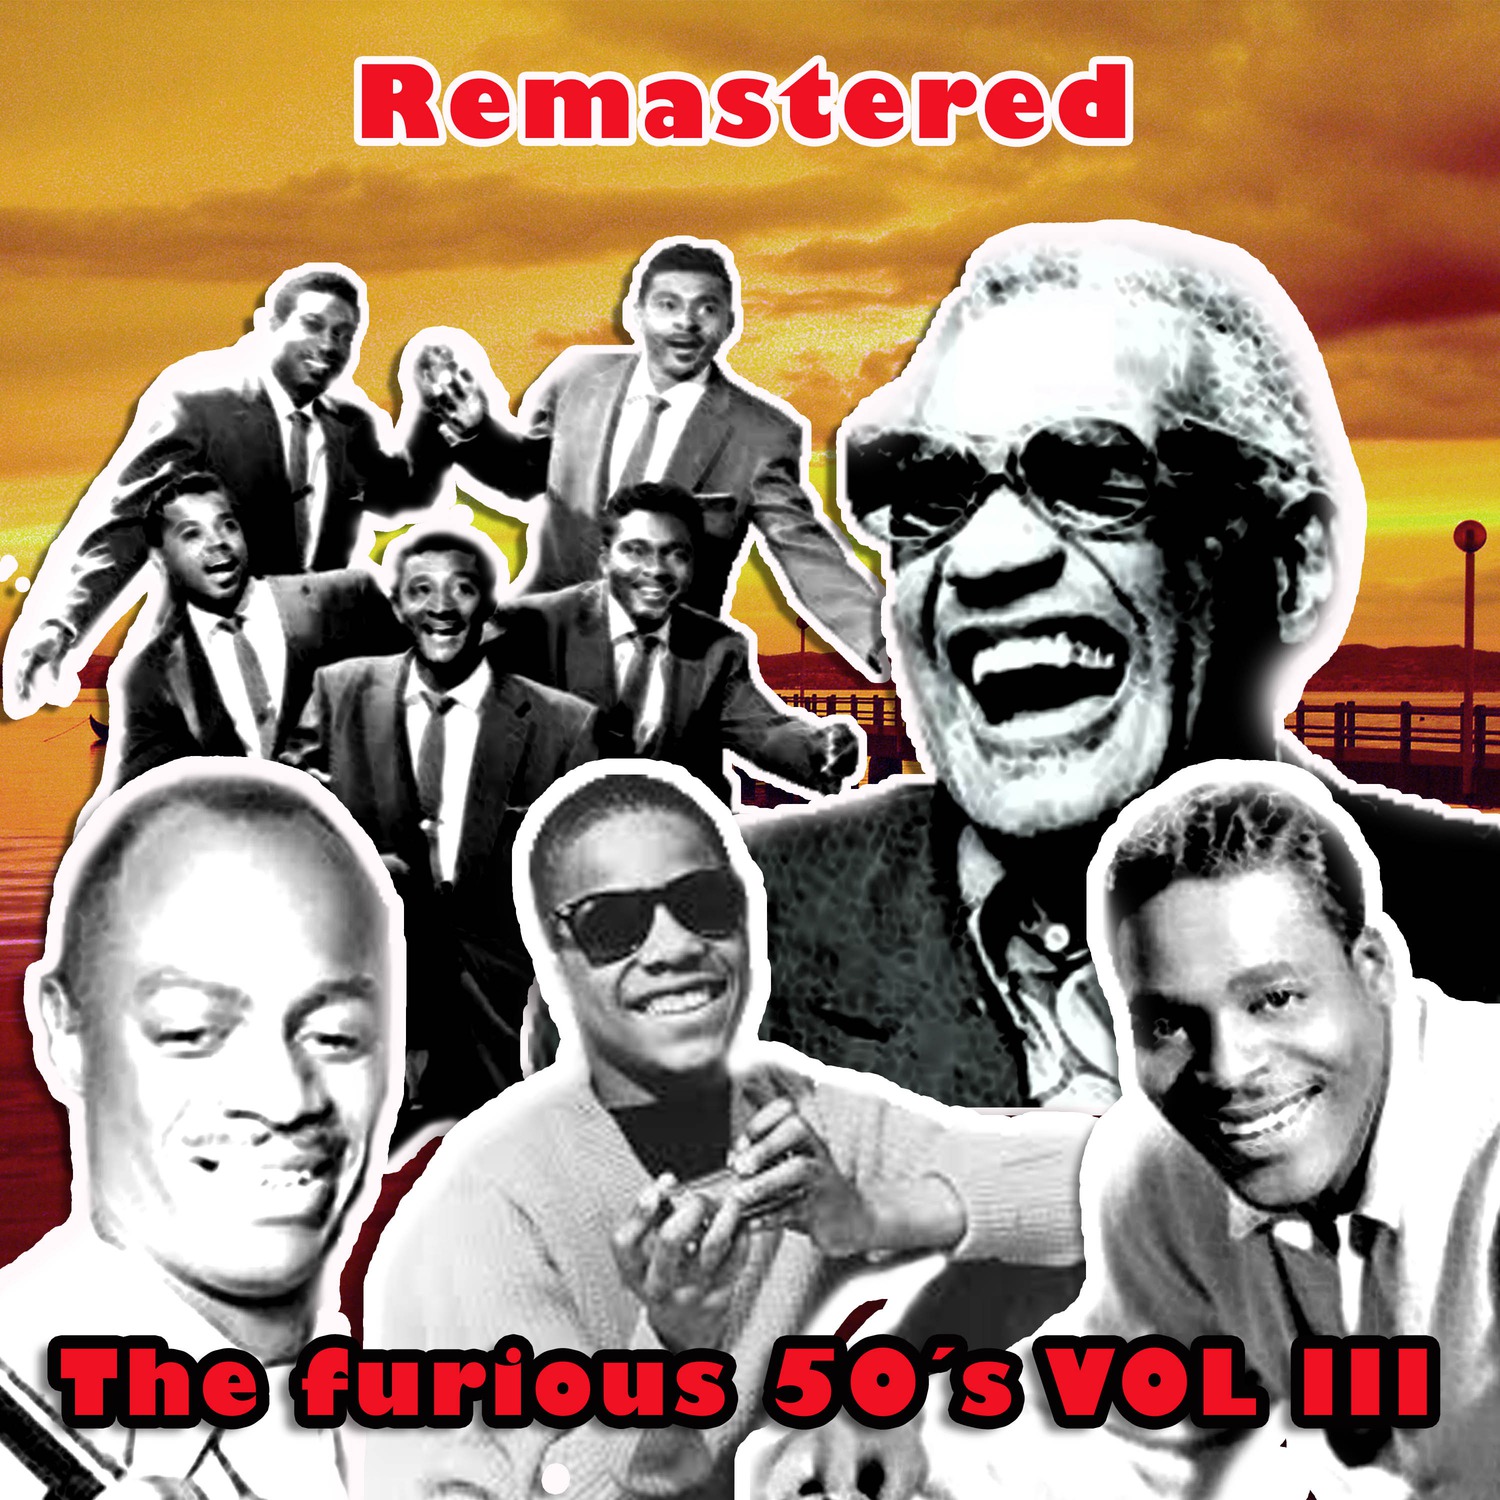 The Furious 50's, Vol. III (Remastered)